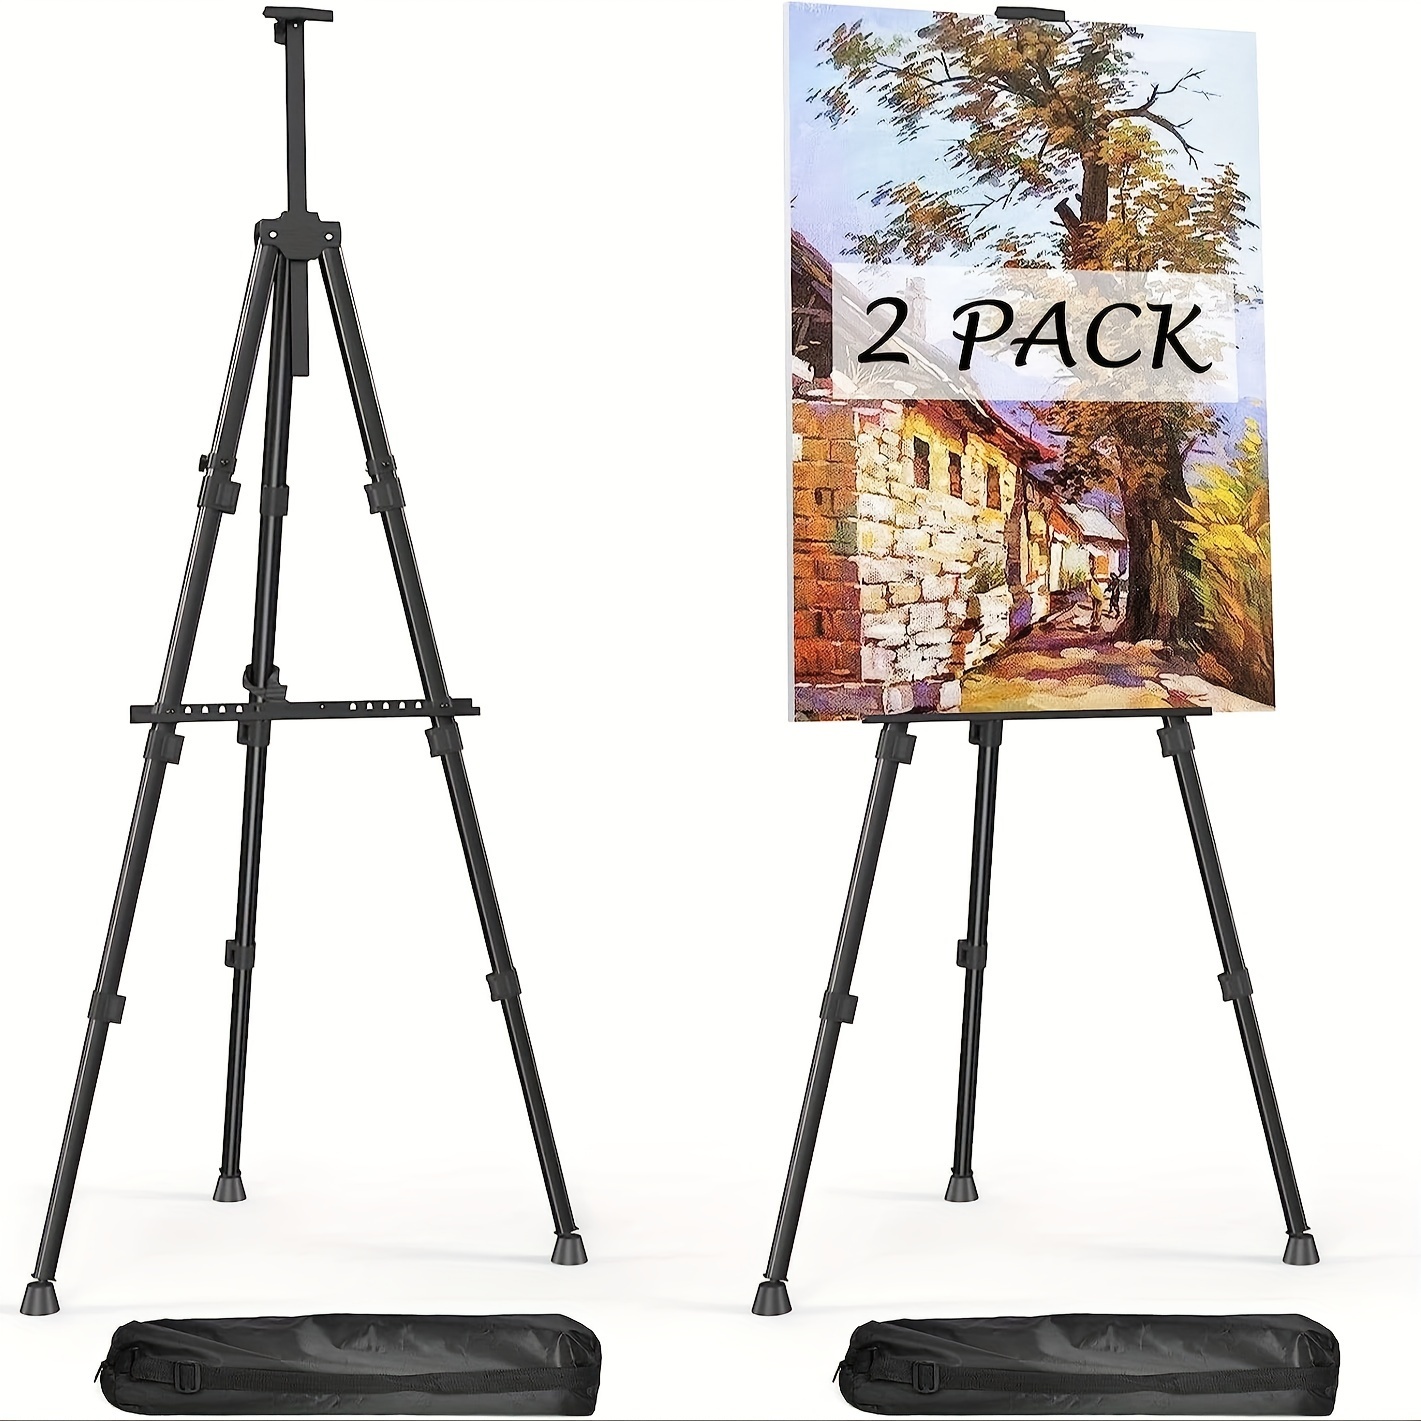 

(2 Pack) Easels For Painting Canvas, 66" Art Easel For Drawing, Portable Painting Easel Stand, Metal Table Top Easel